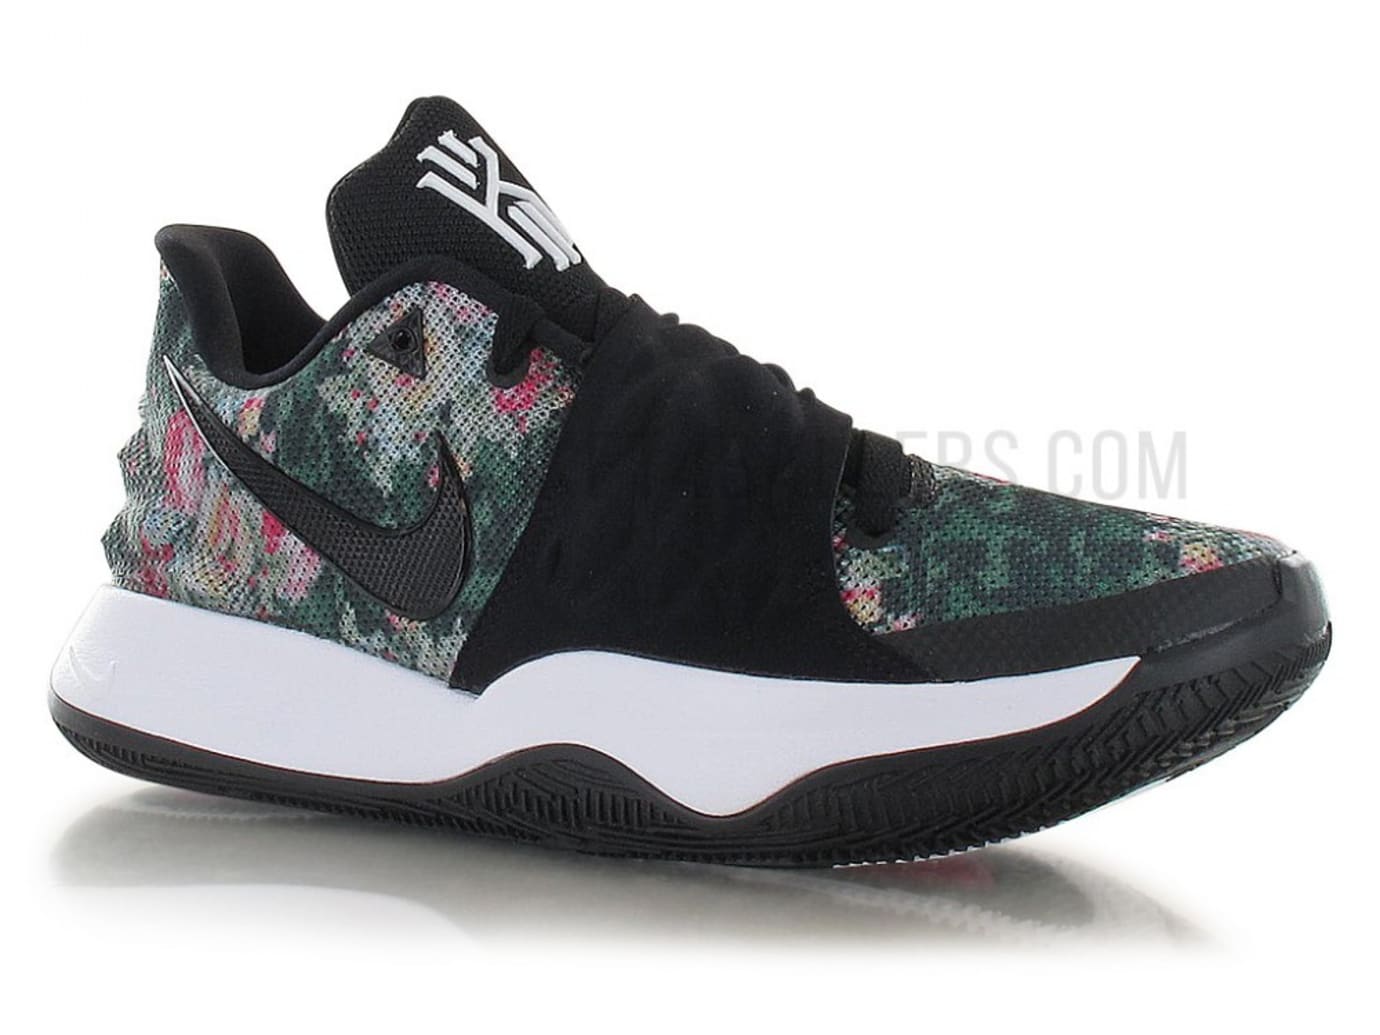 Nike Kyrie Low 'Floral' AO8979002 Release Date